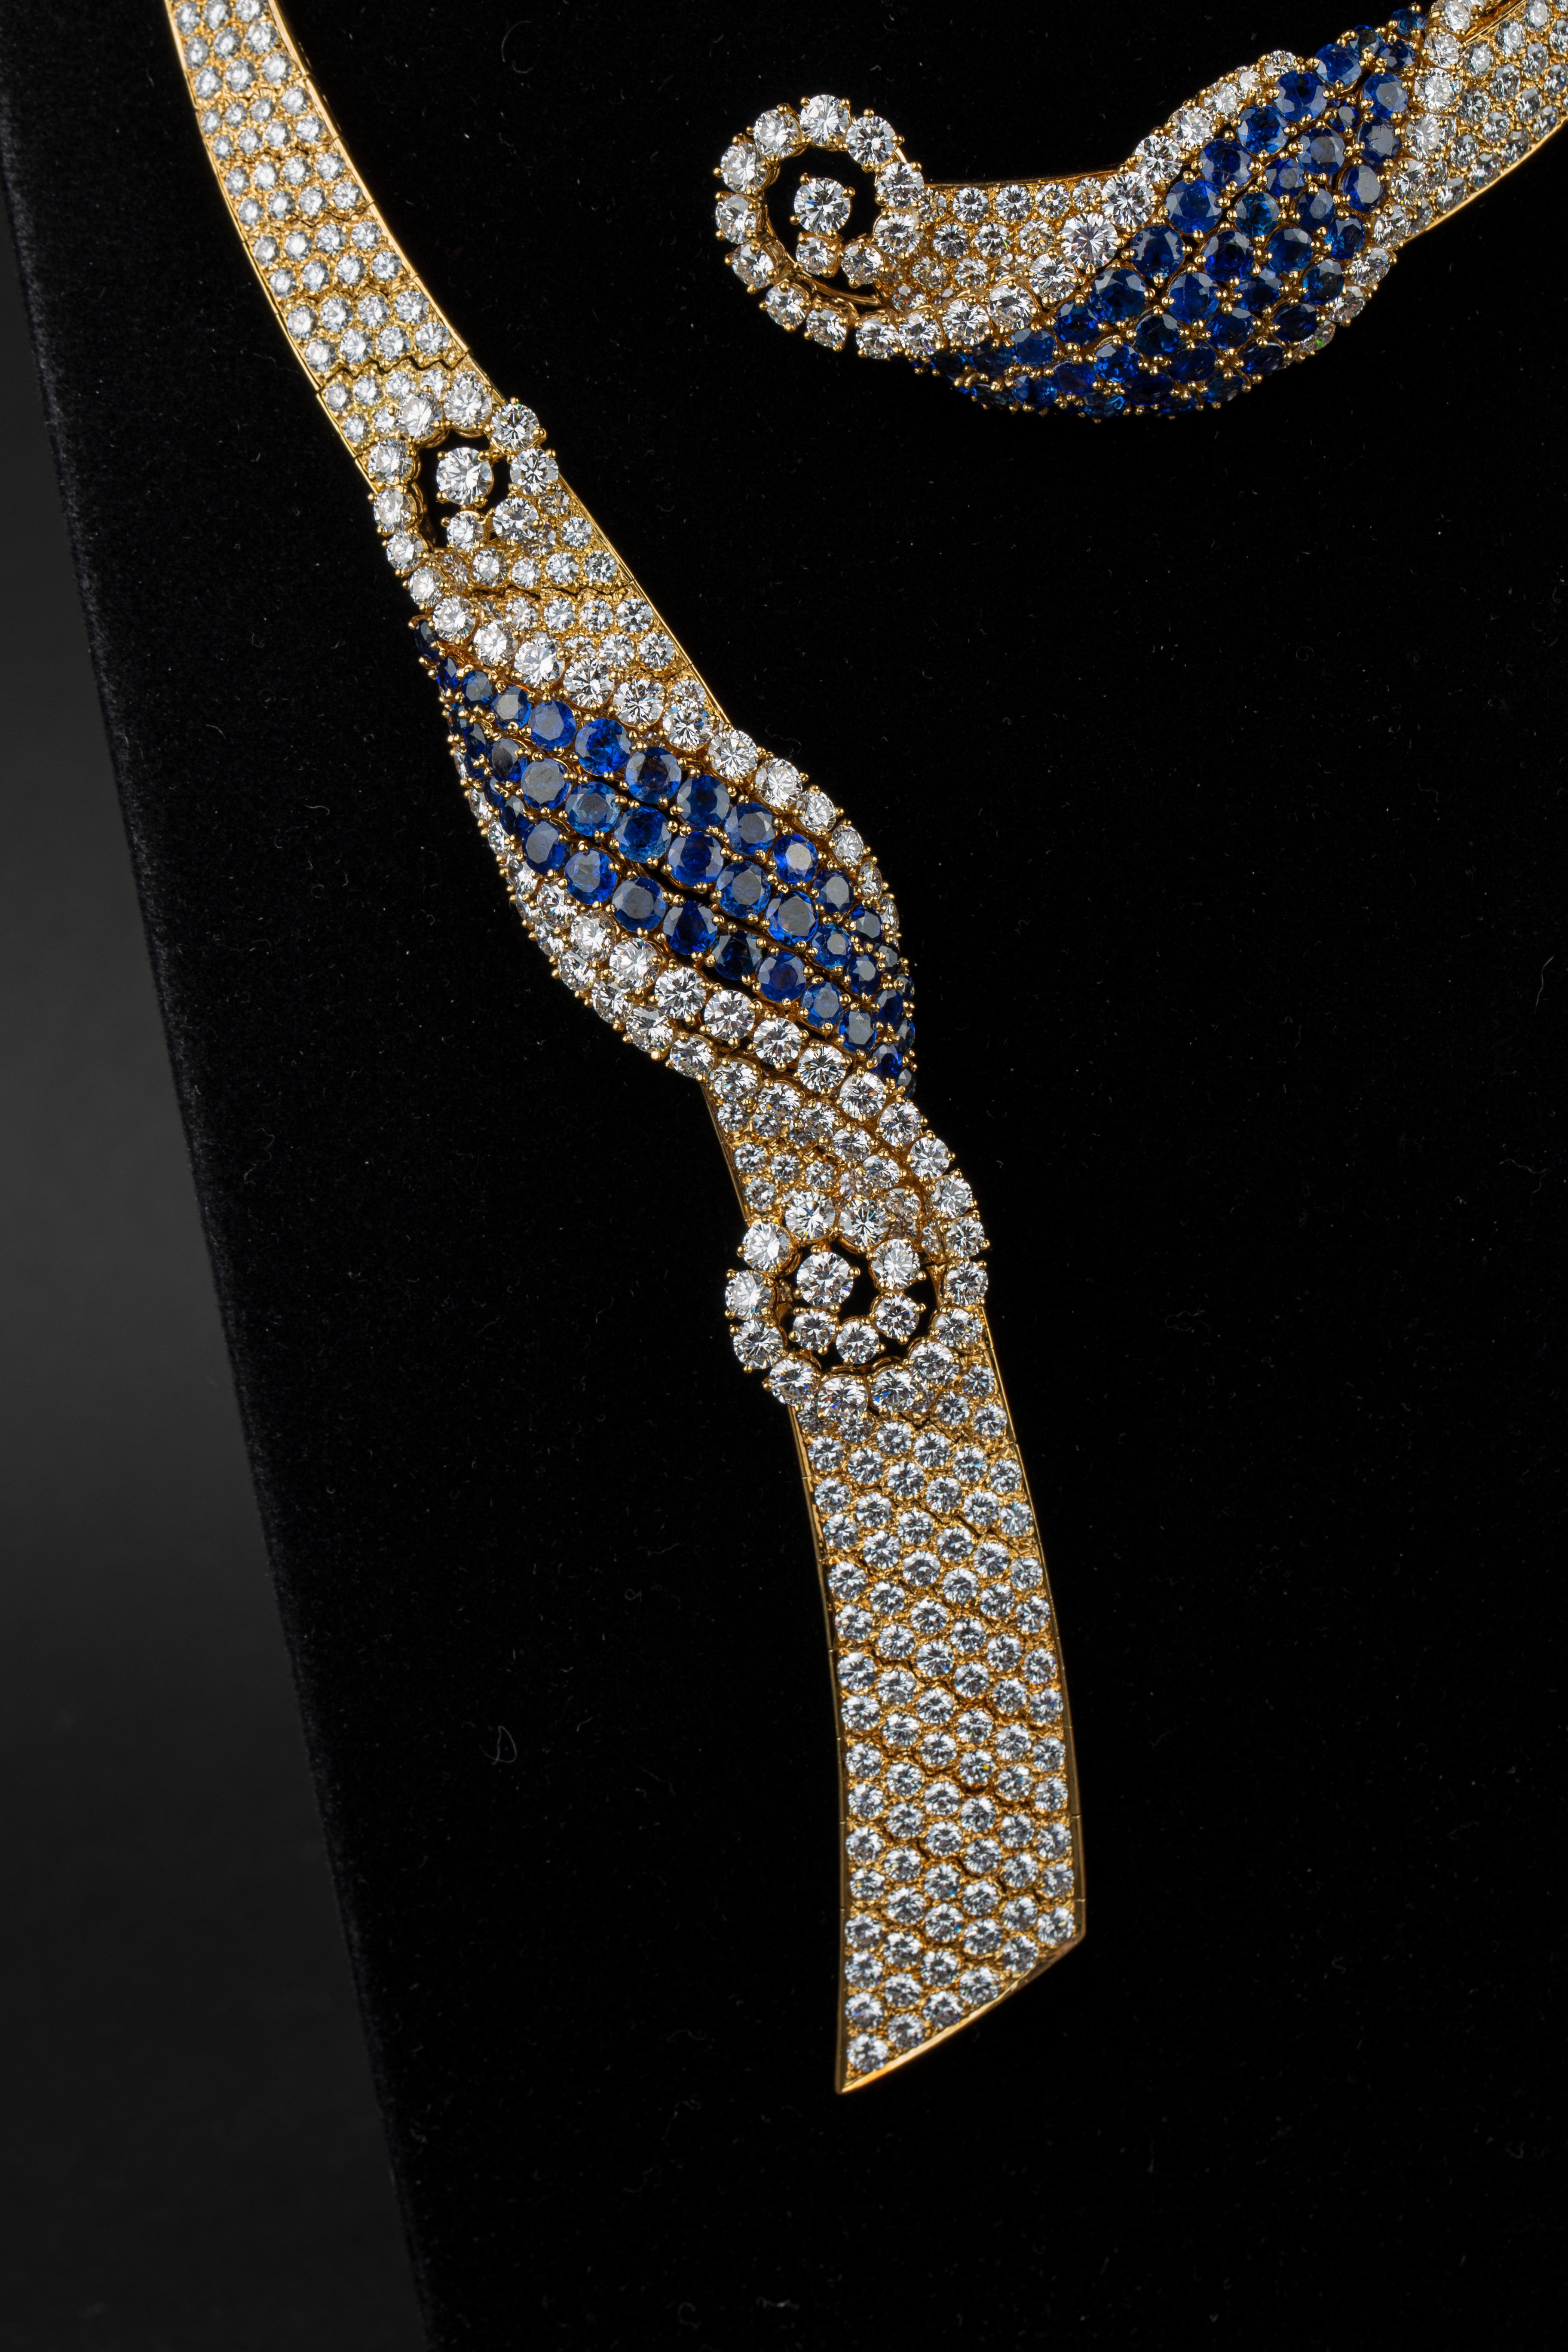 M.Gerard Diamond and Sapphire Necklace, and Earrings Set in 18K Yellow Gold. Made in Paris by esteemed jeweler André Vassort in the 1970s.

matching bracelet available too. 

102 carats of fine quality diamonds, E/F Color - VVS Clarity

35 carats of